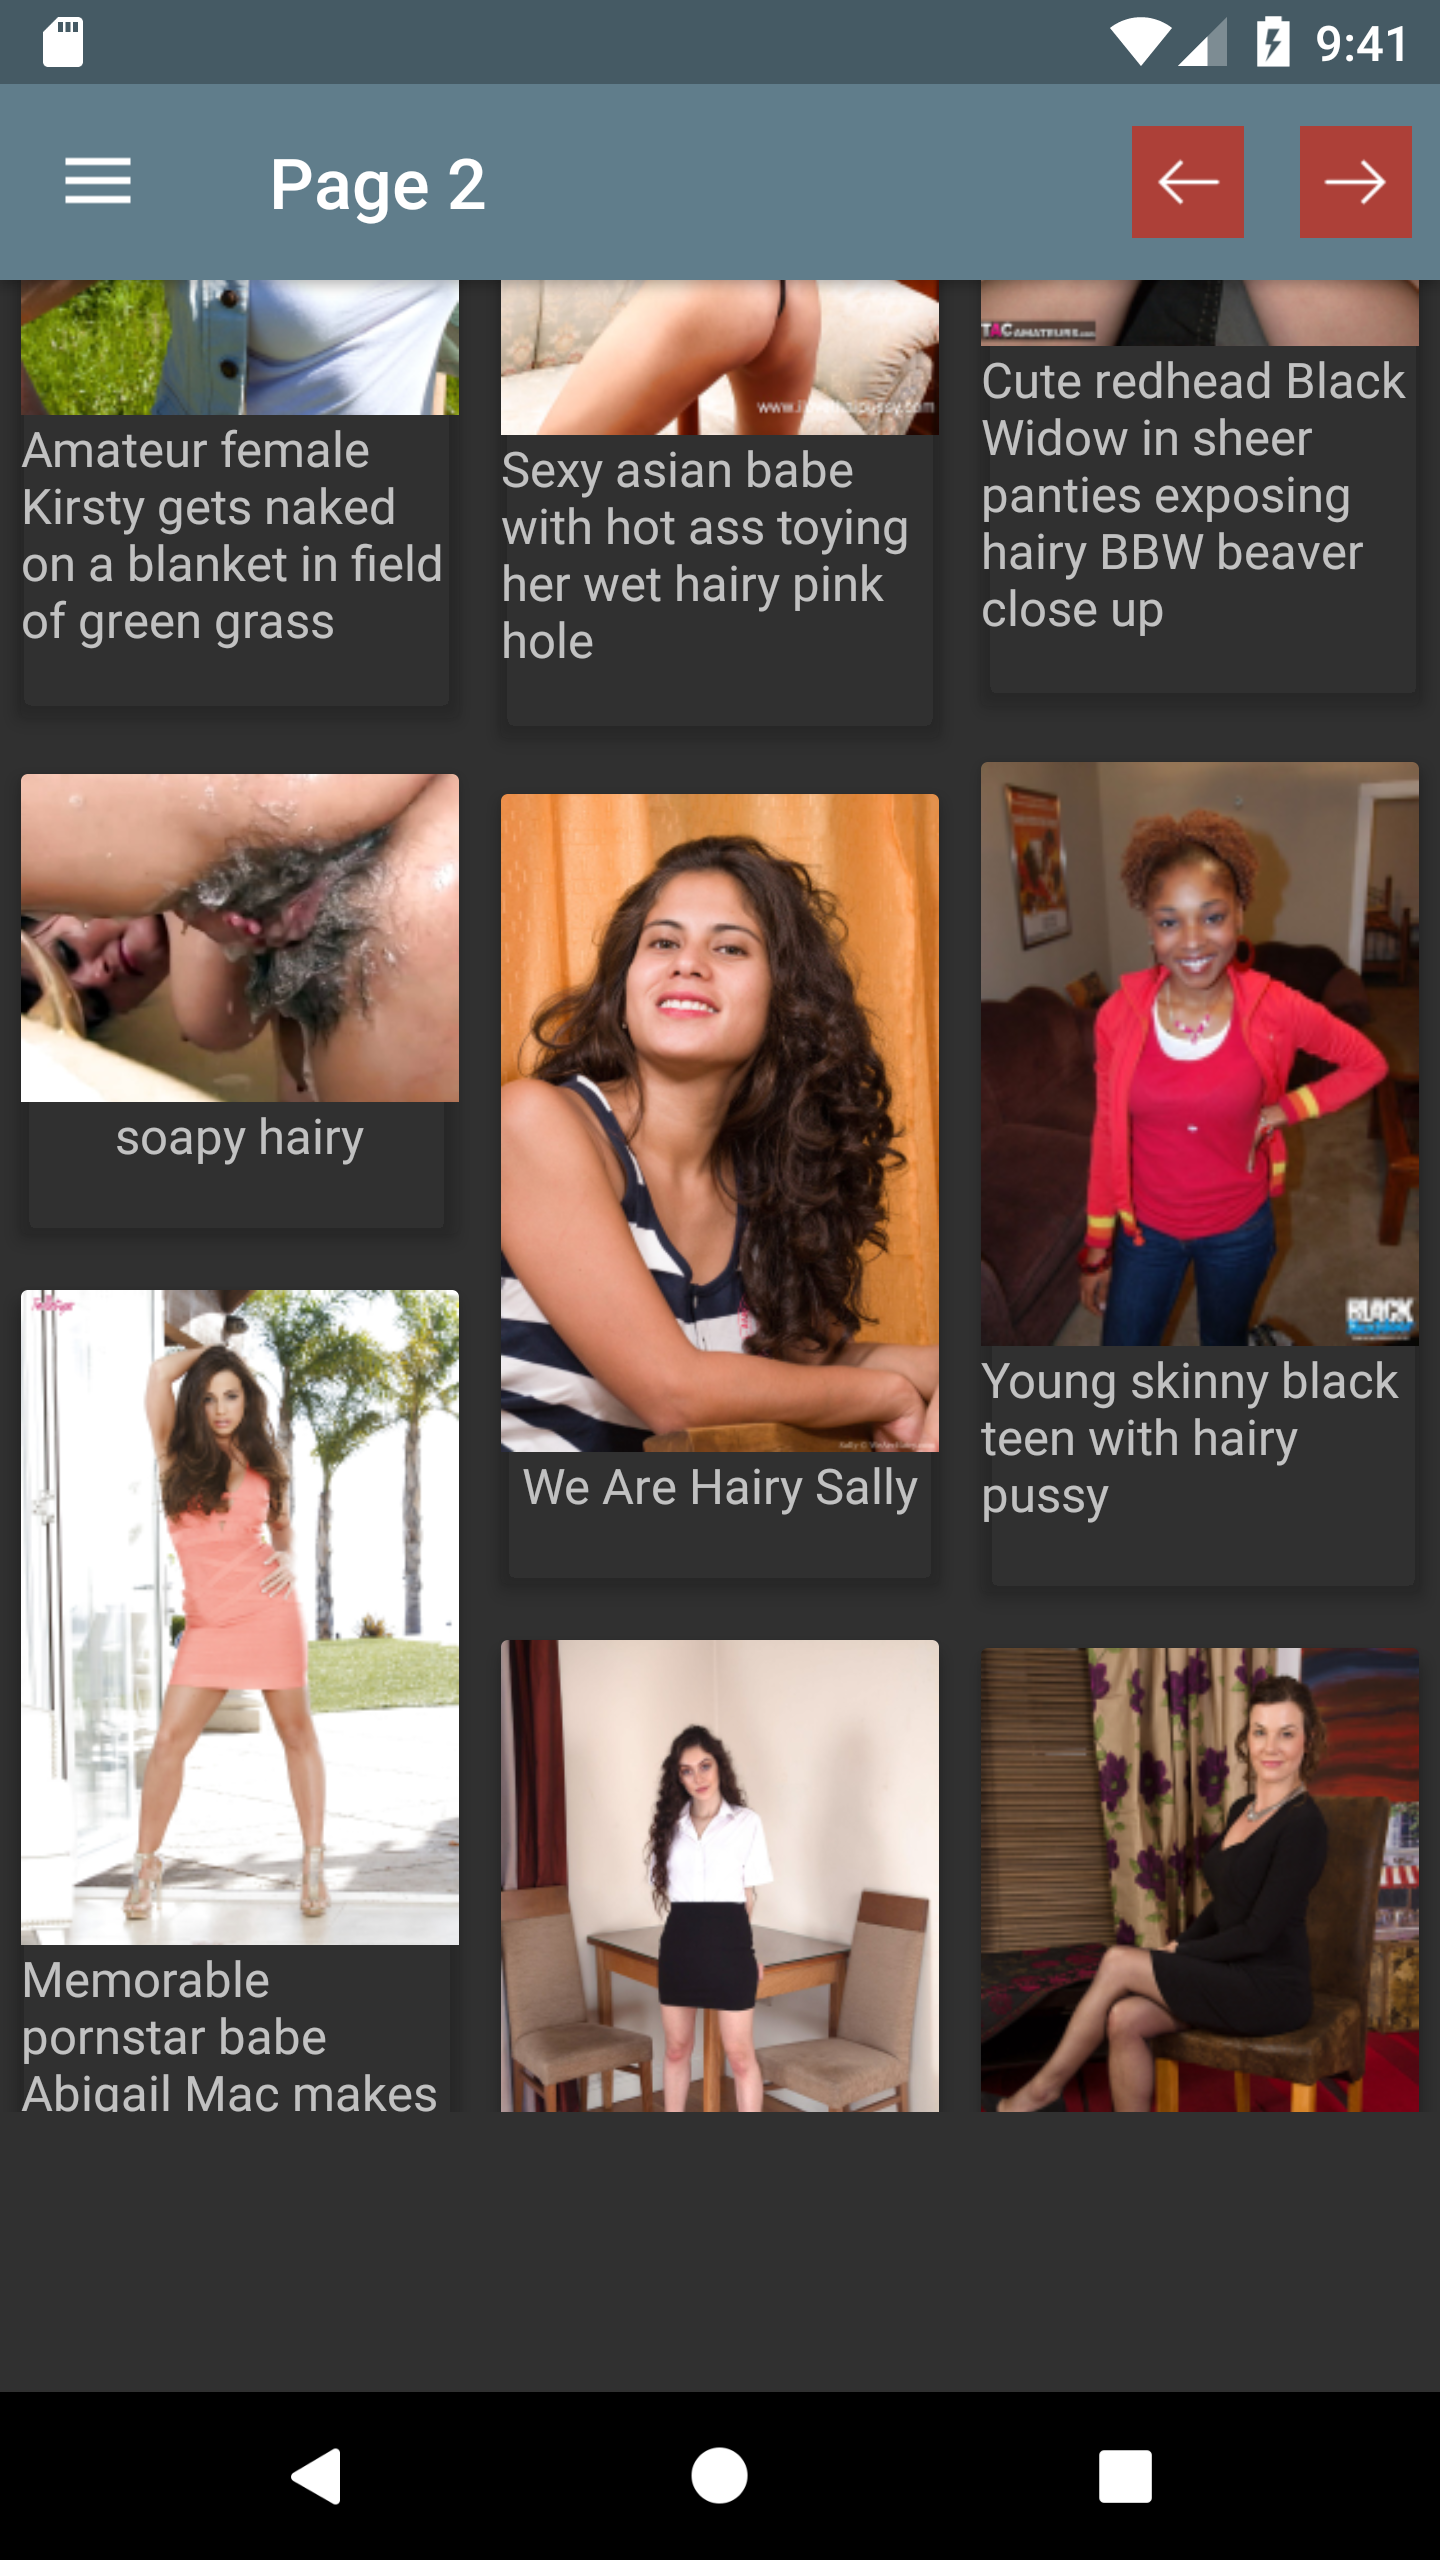 Hairy Porn comics,video,femboy,pornstars,texas,hot,girls,adult,free,sexy,app,offline,apk,anime,alexis,galleries,manga,apps,porn,gallery,pictures,sexpedition,hentai